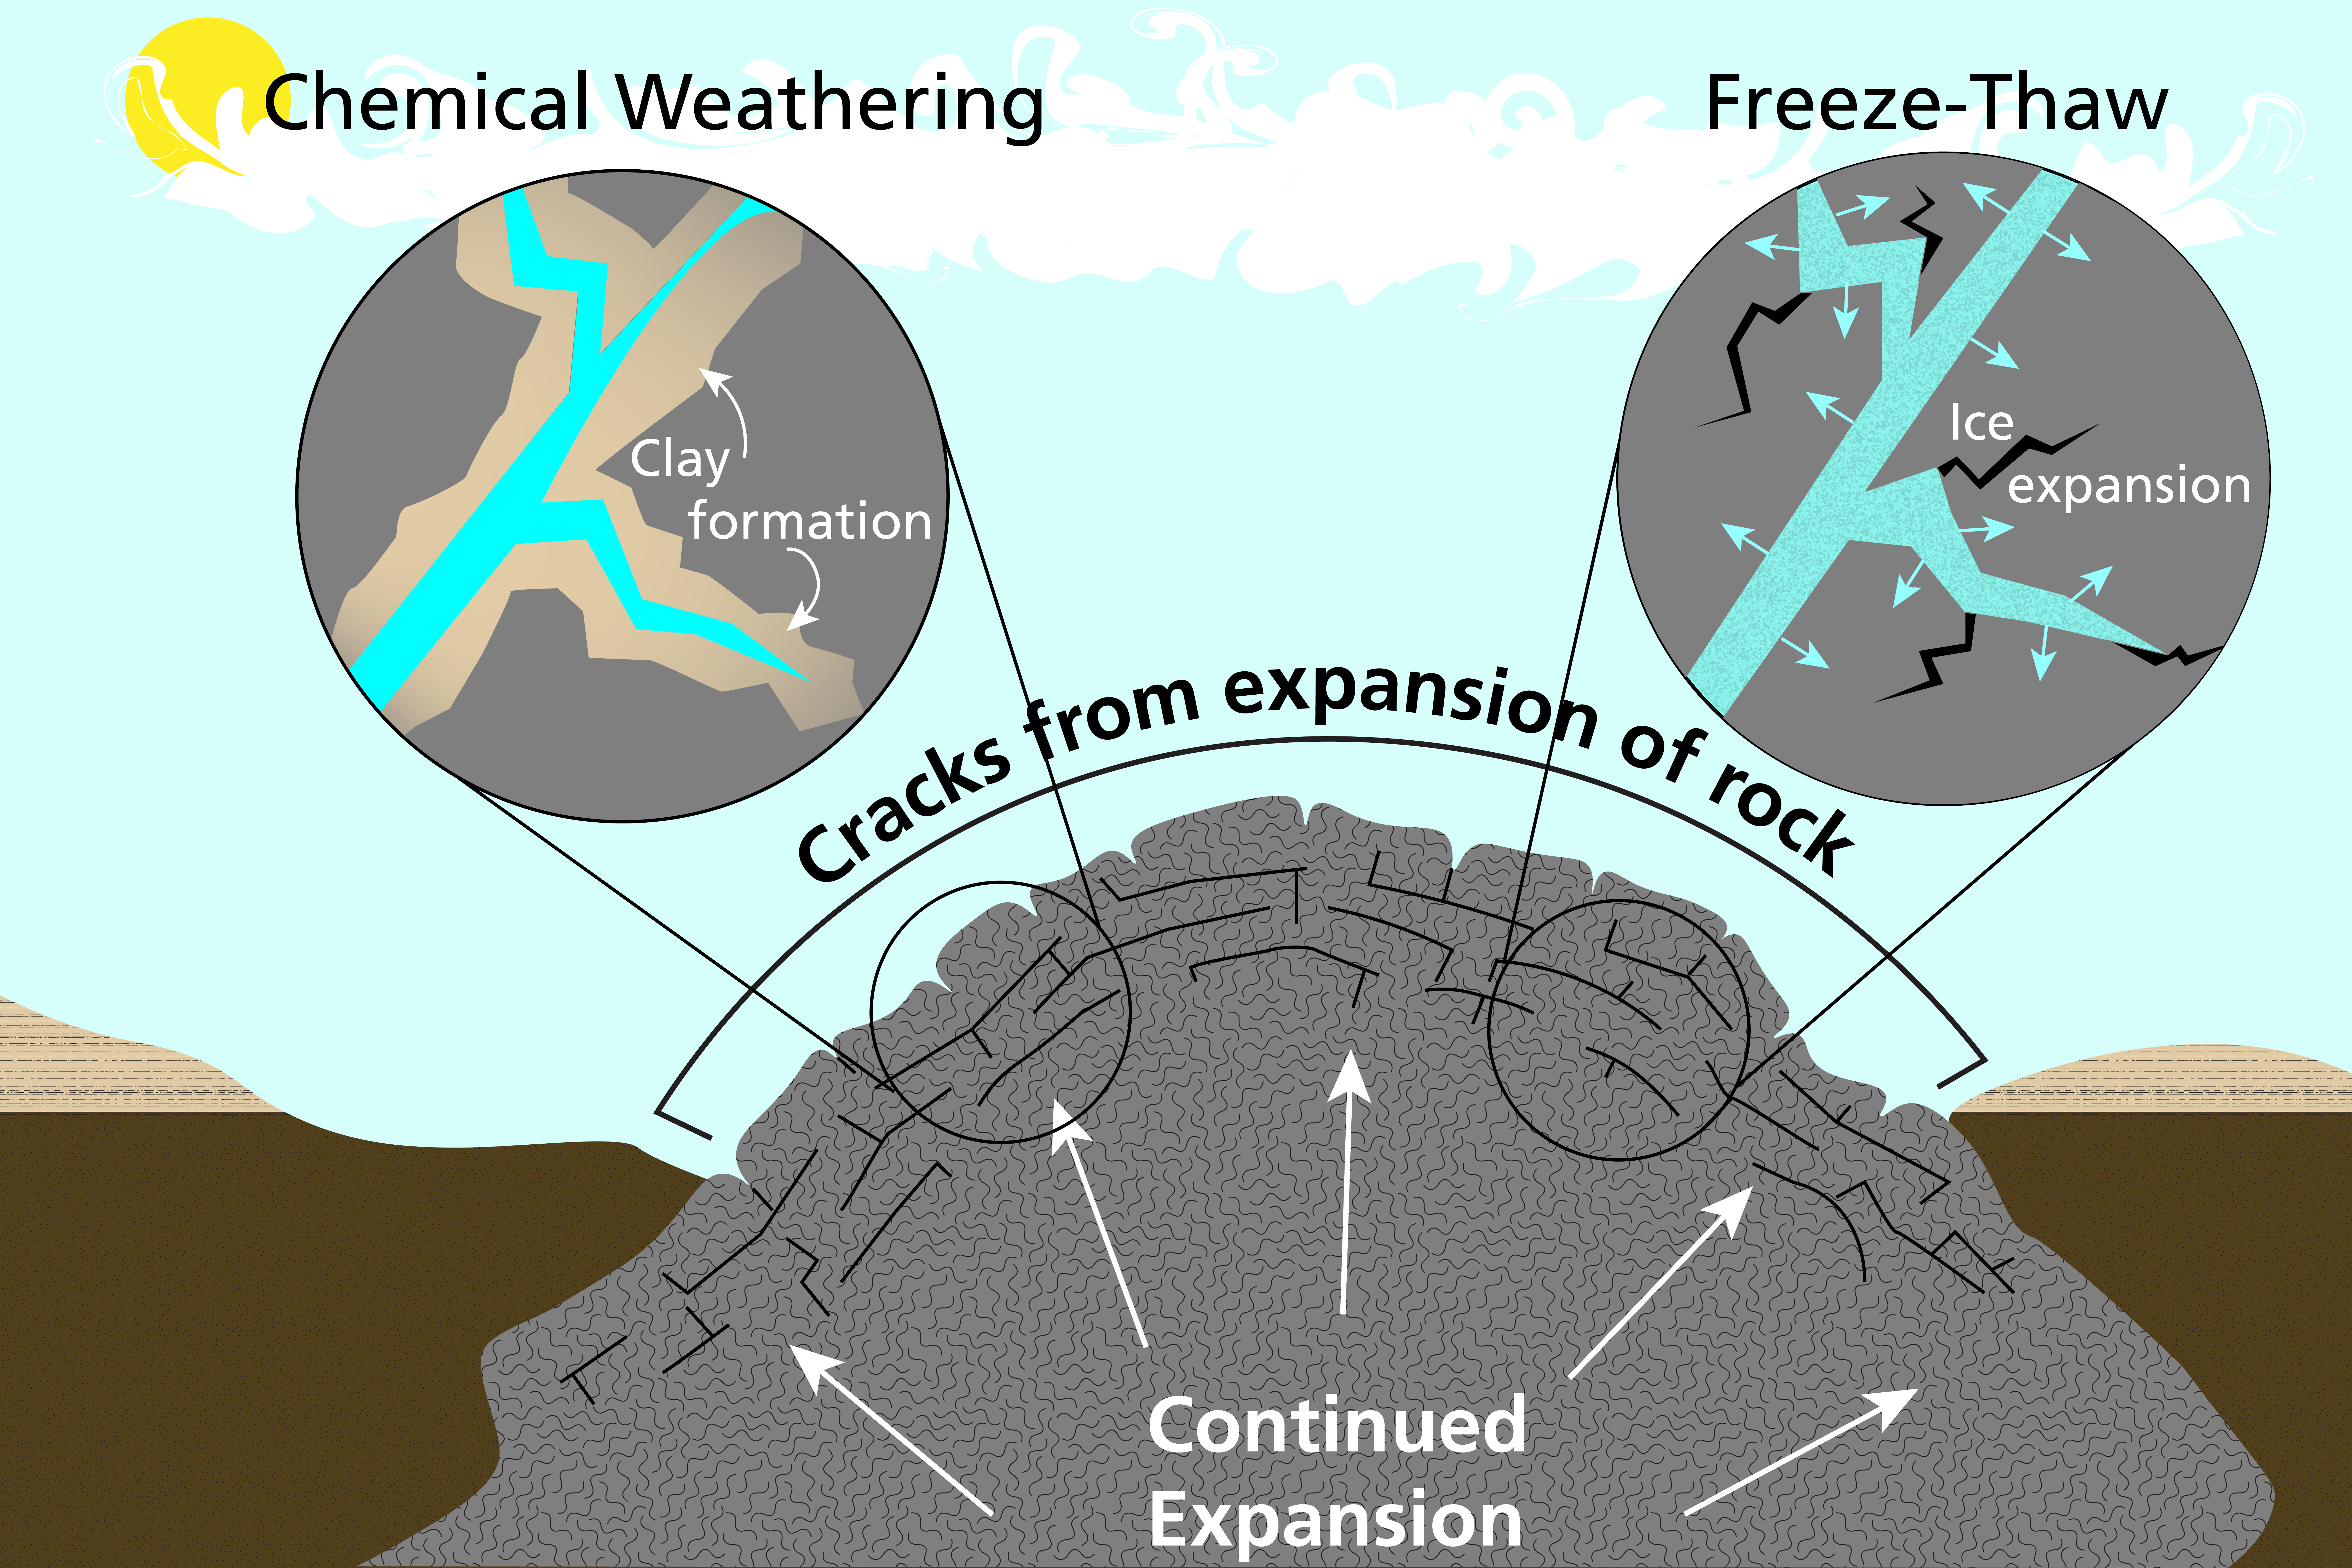 Schematic image showing a batholith being affected by frost weathering and chemical weathering using two magnified insets.